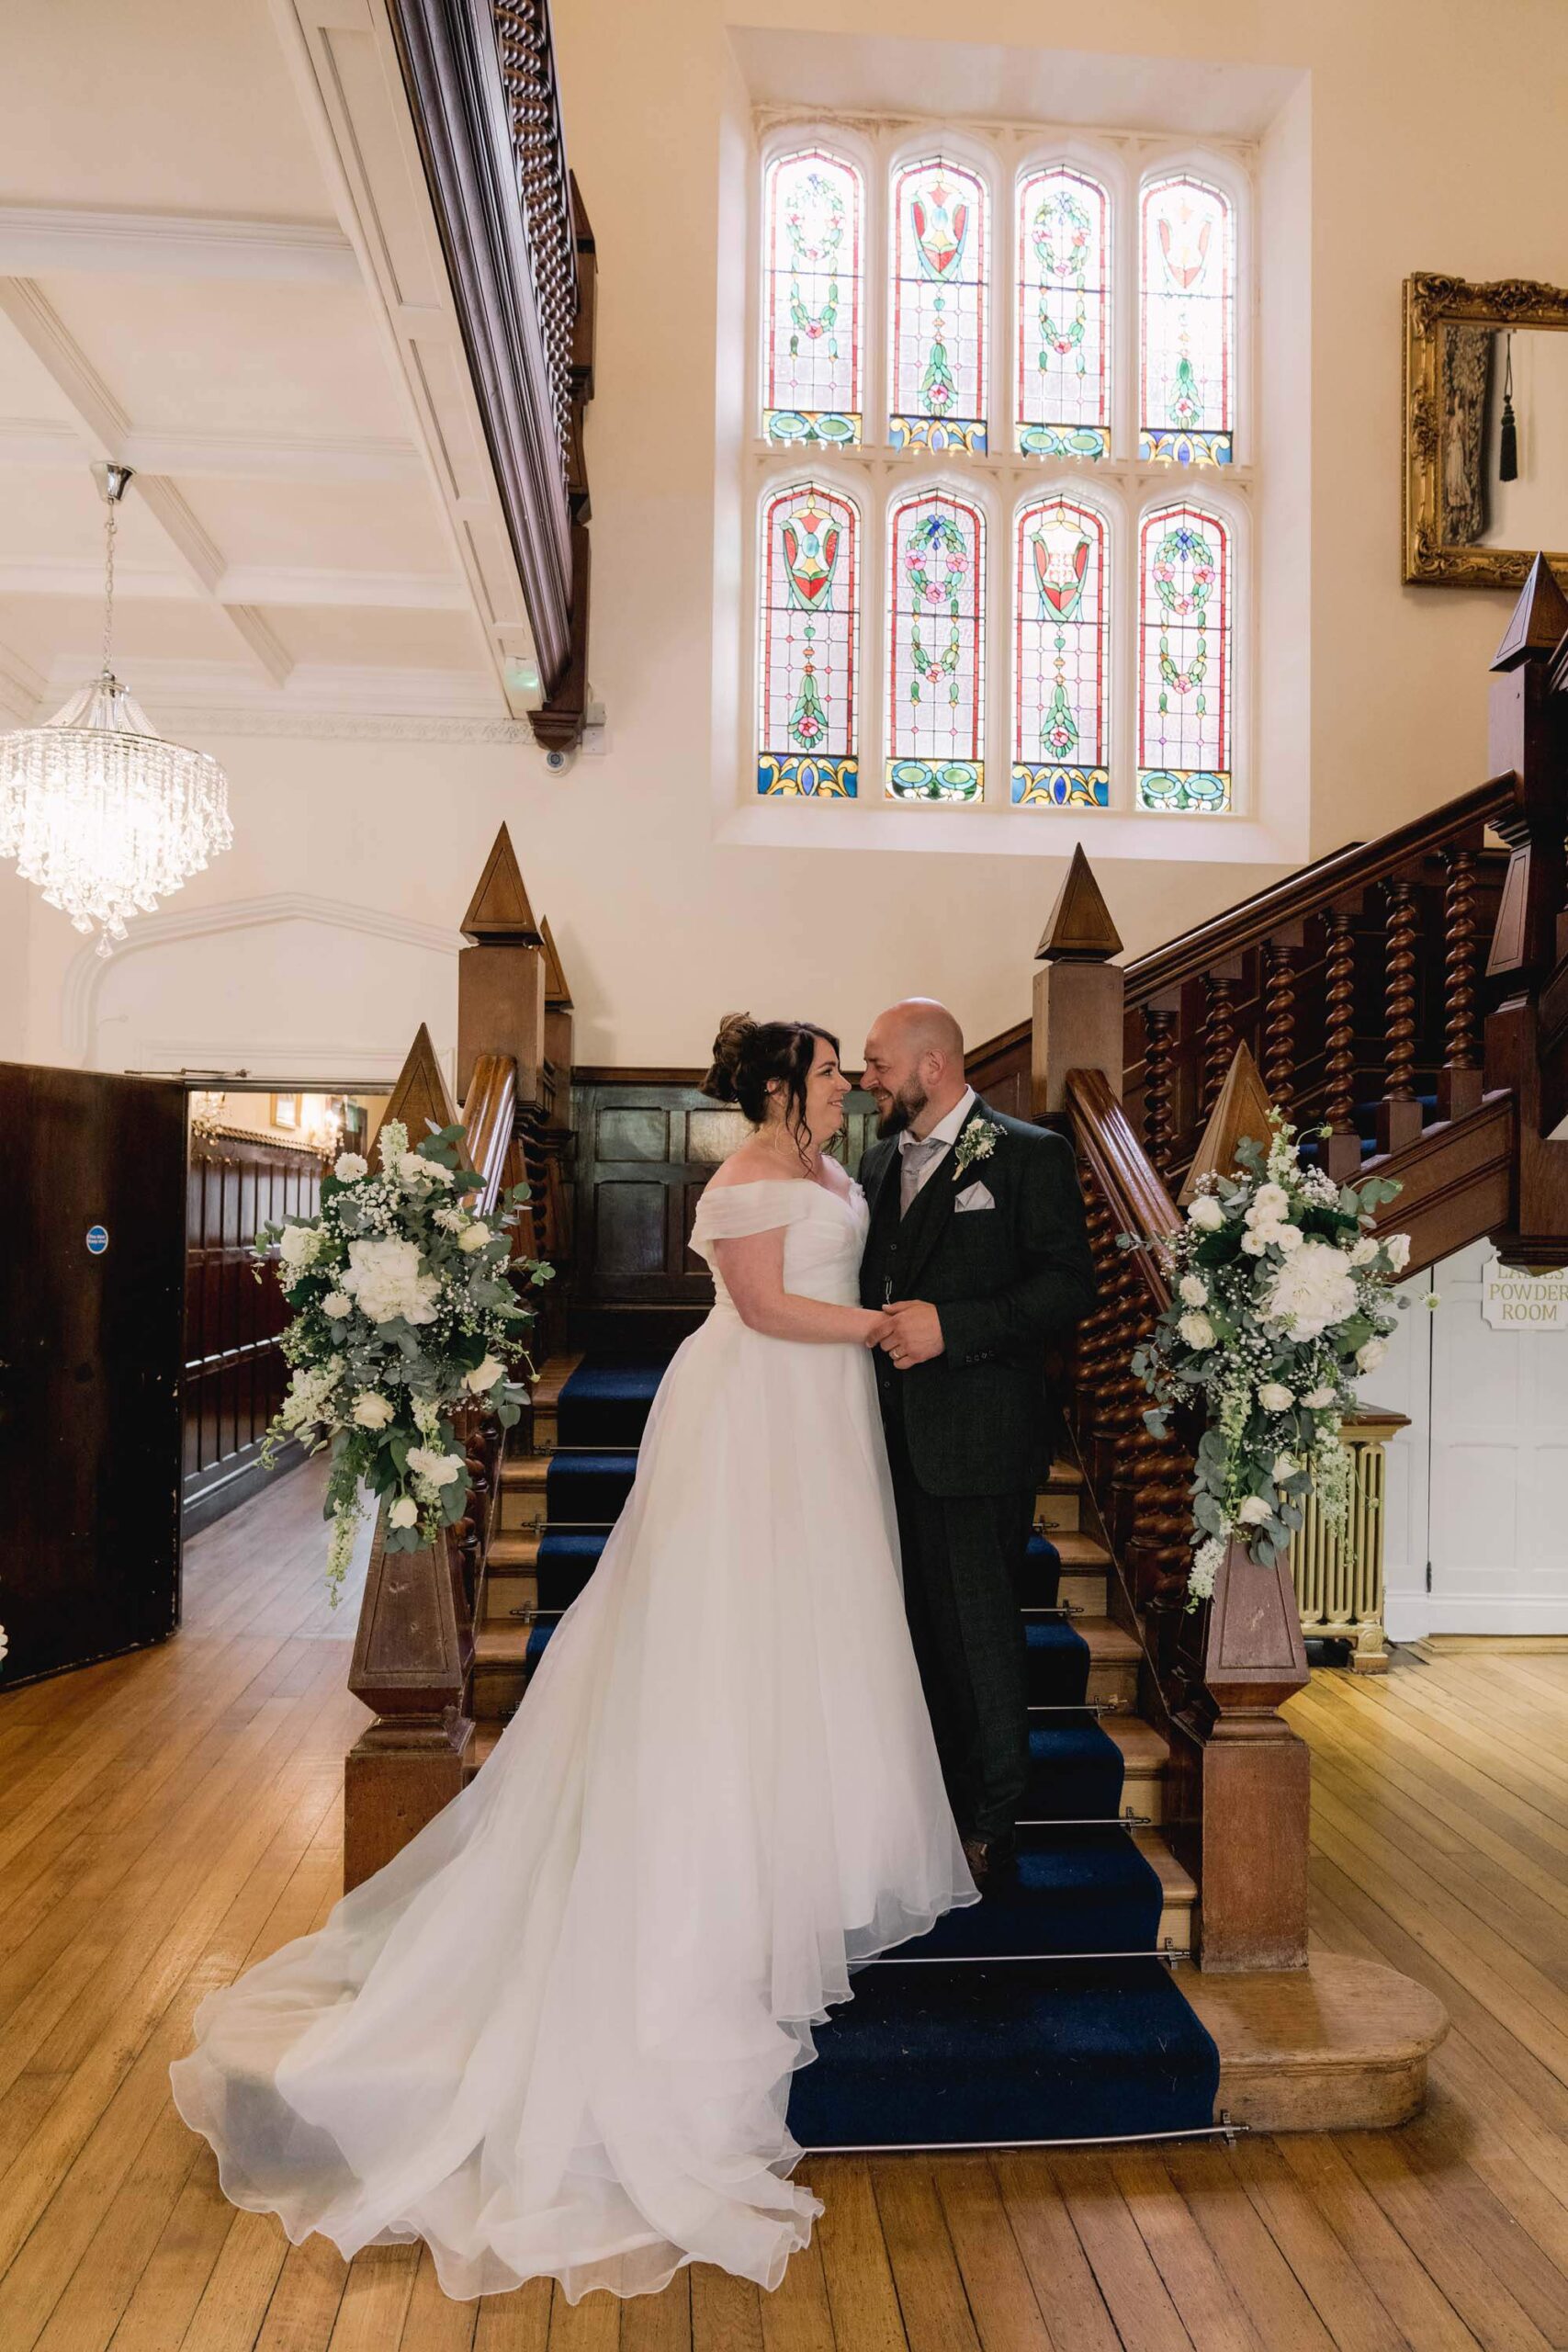 Bride and groom on the stairs at Highley Manor wedding venue.